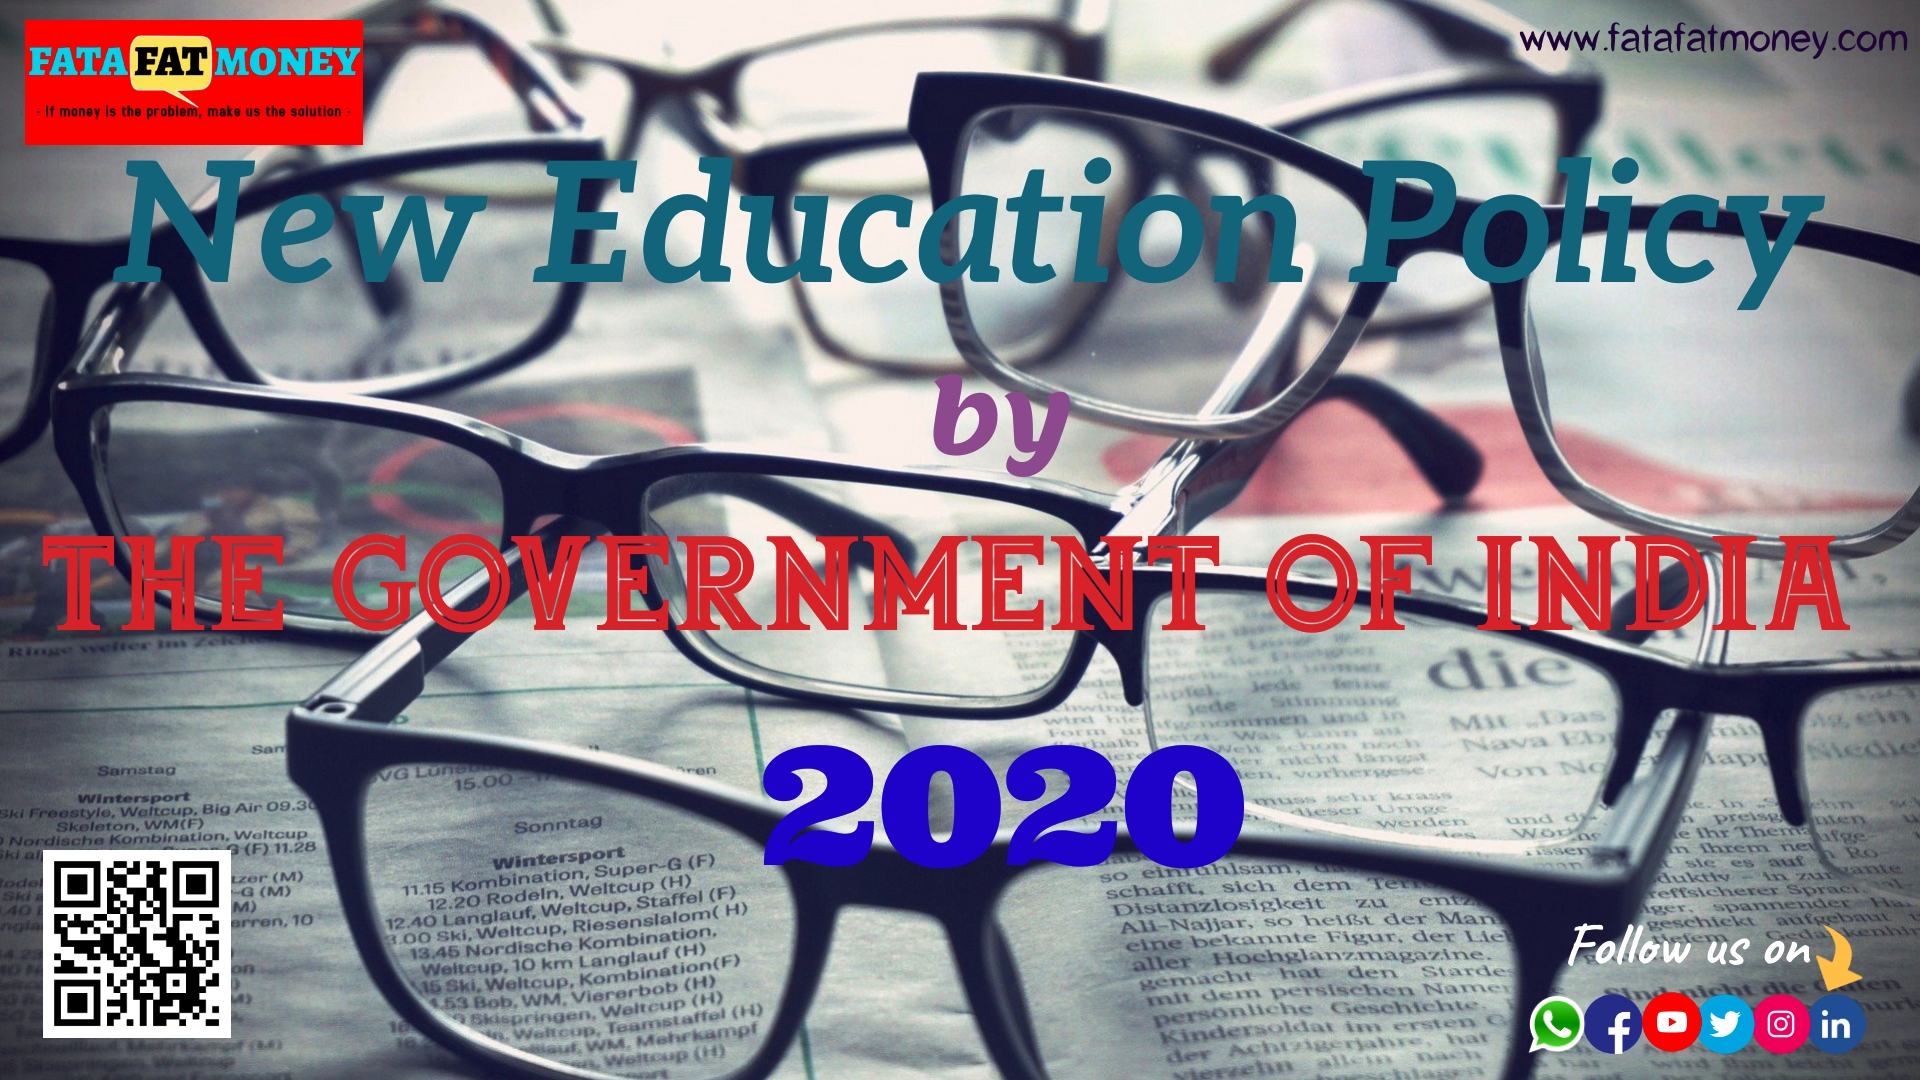 New Education Policy by The Government of India 2020 blog image